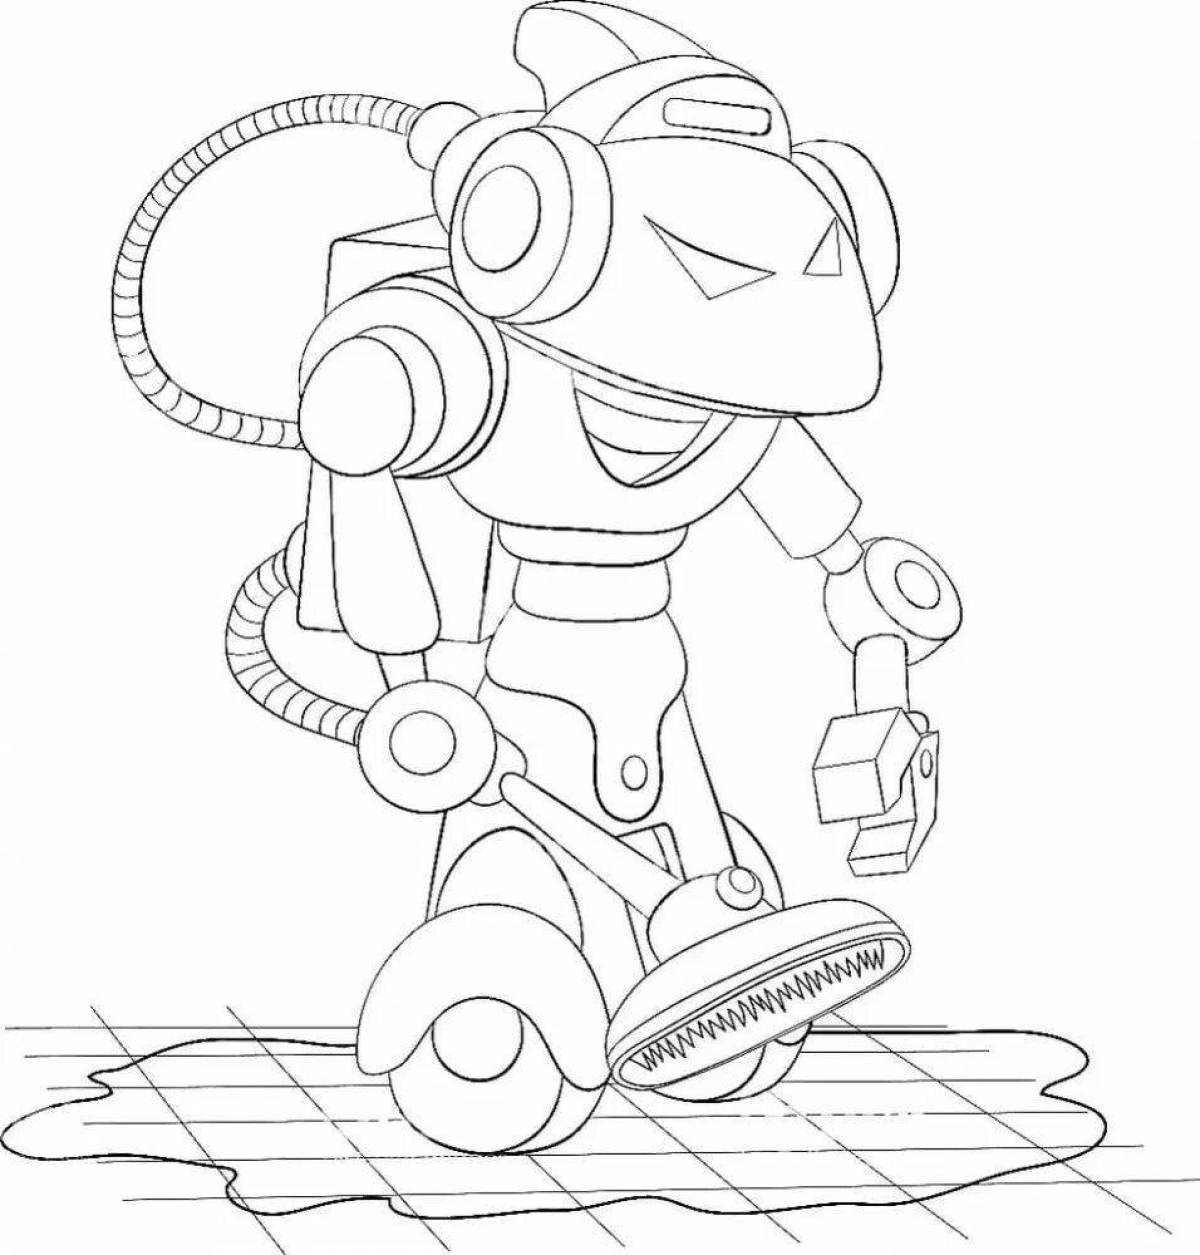 Fabulous robot vacuum cleaner coloring page